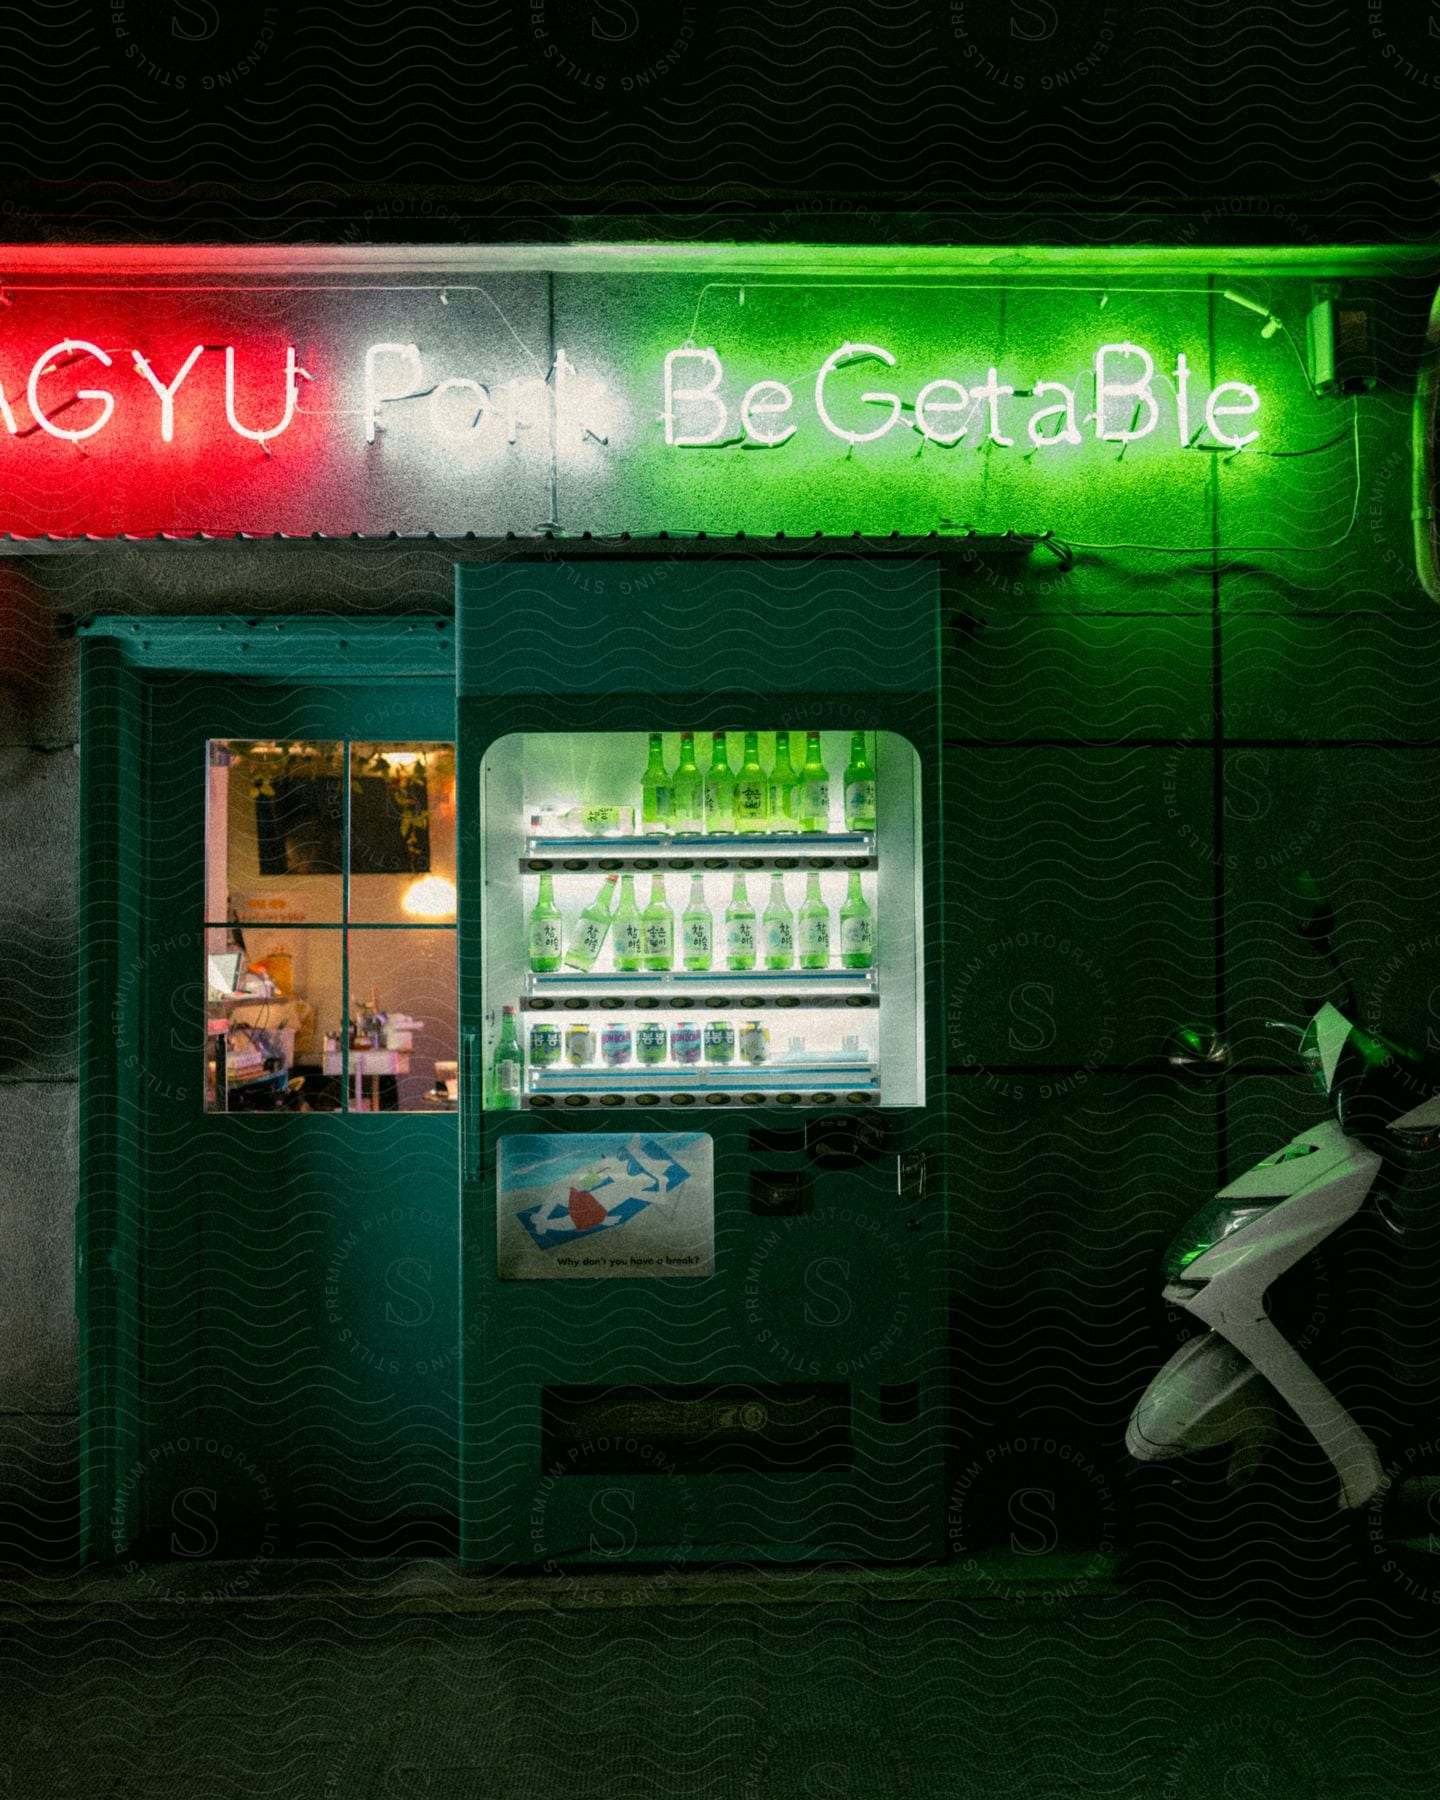 A green bottle drinks machine in an exterior with a white motorbike and on top written in red and neon green